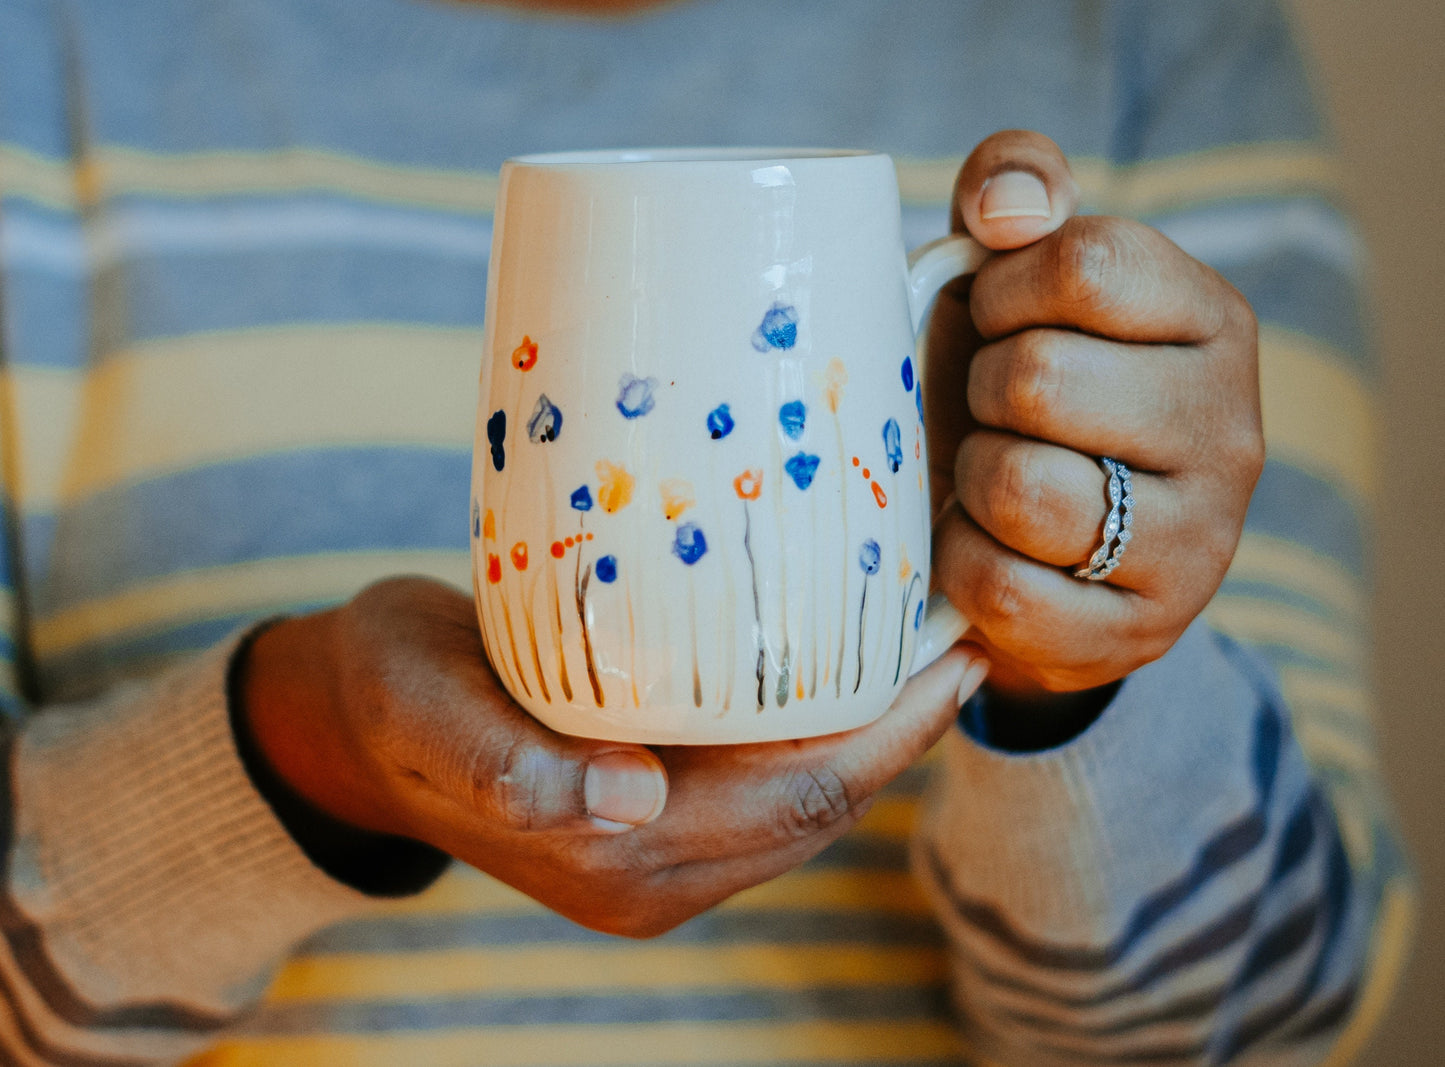 Wildflower Hand Painted Pottery Mug - Proudly Handmade in the USA